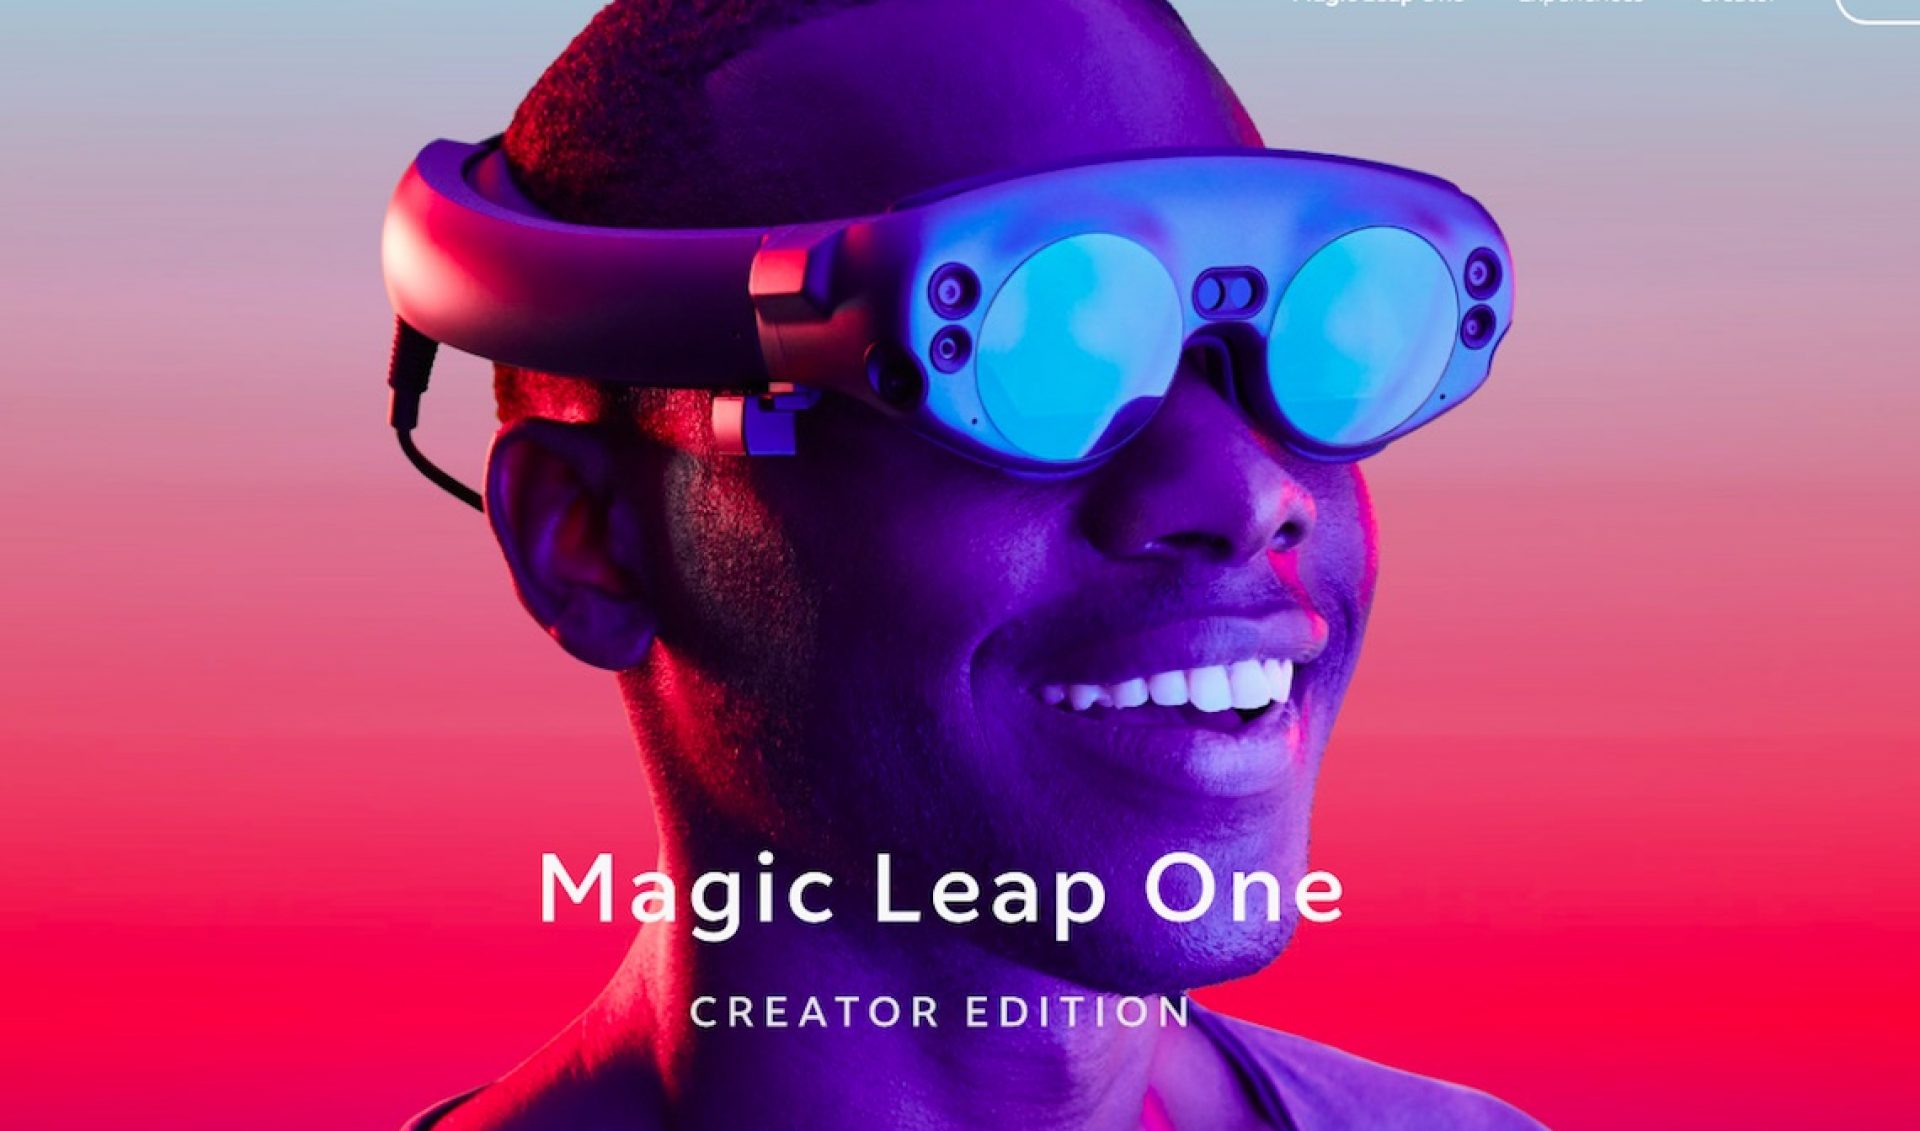 AR Headset For Creators, Magic Leap One, Goes On Sale Today For $2,295